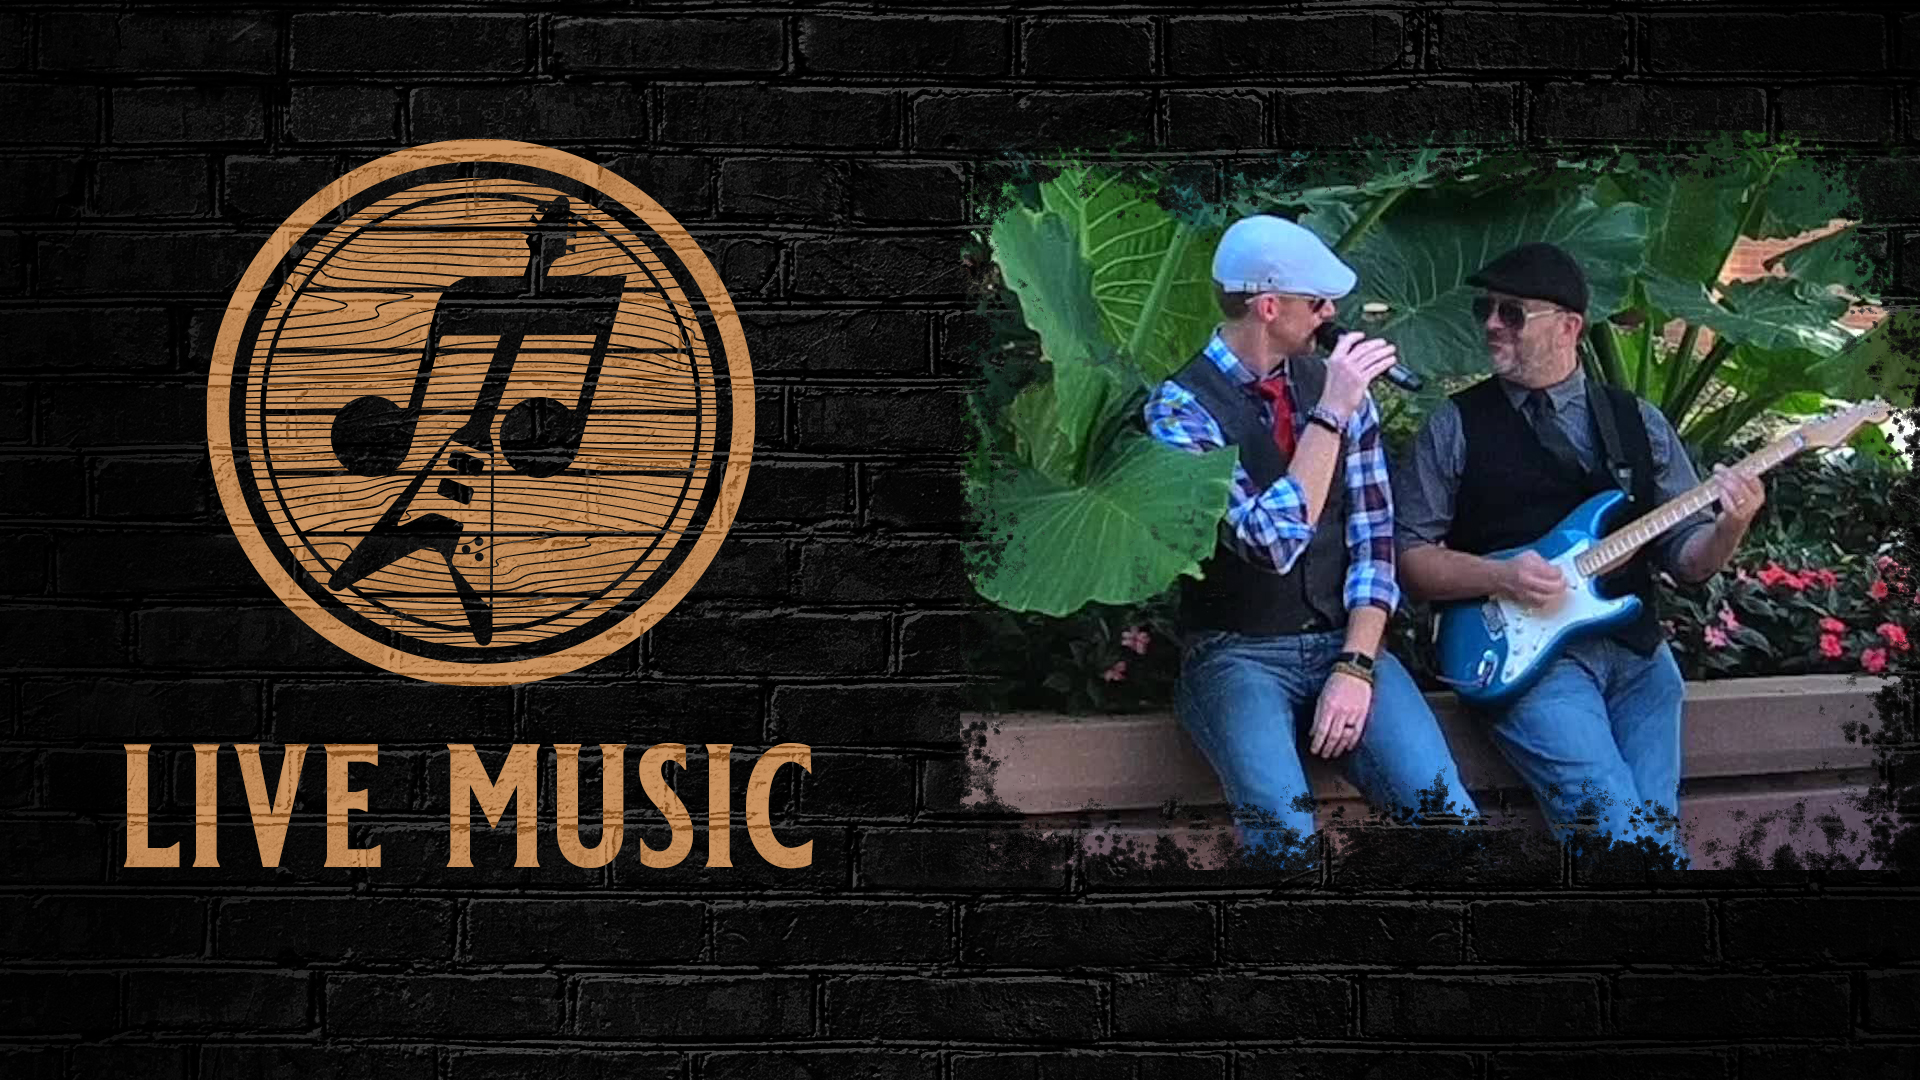 Live music from Musicology at Frankie Martin's Garden